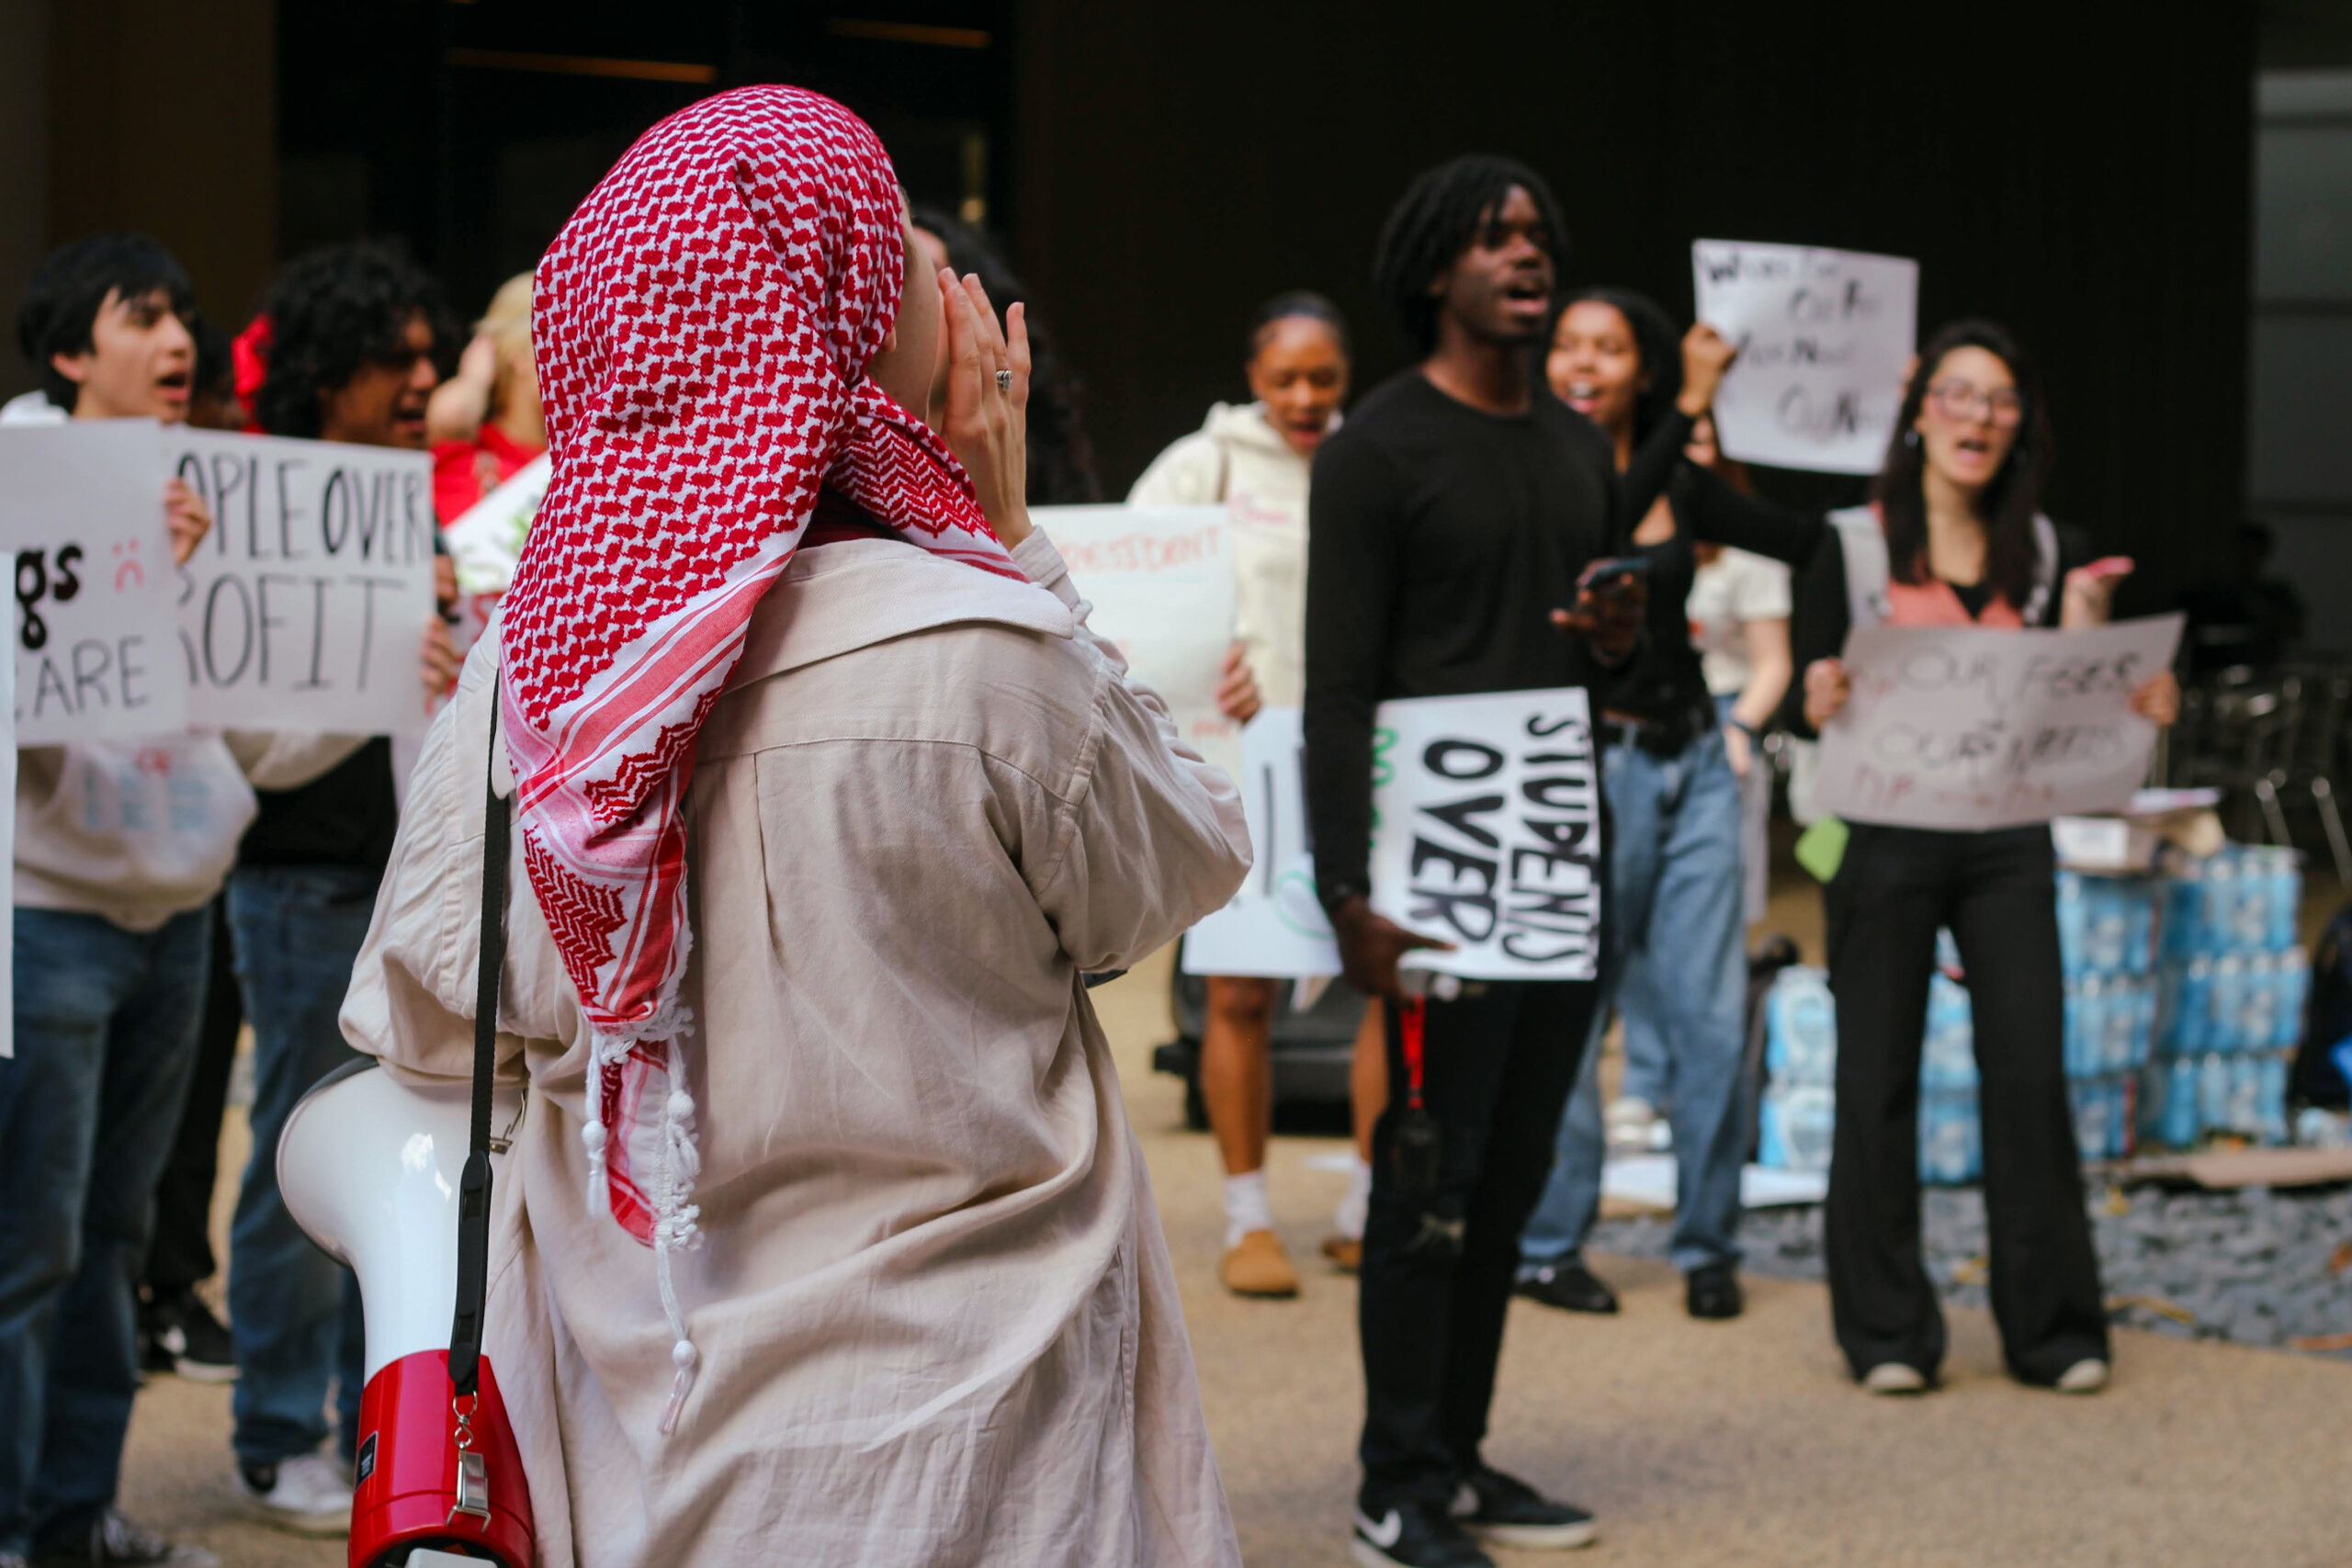 Young person wearing a keffiyeh and bullhorn.